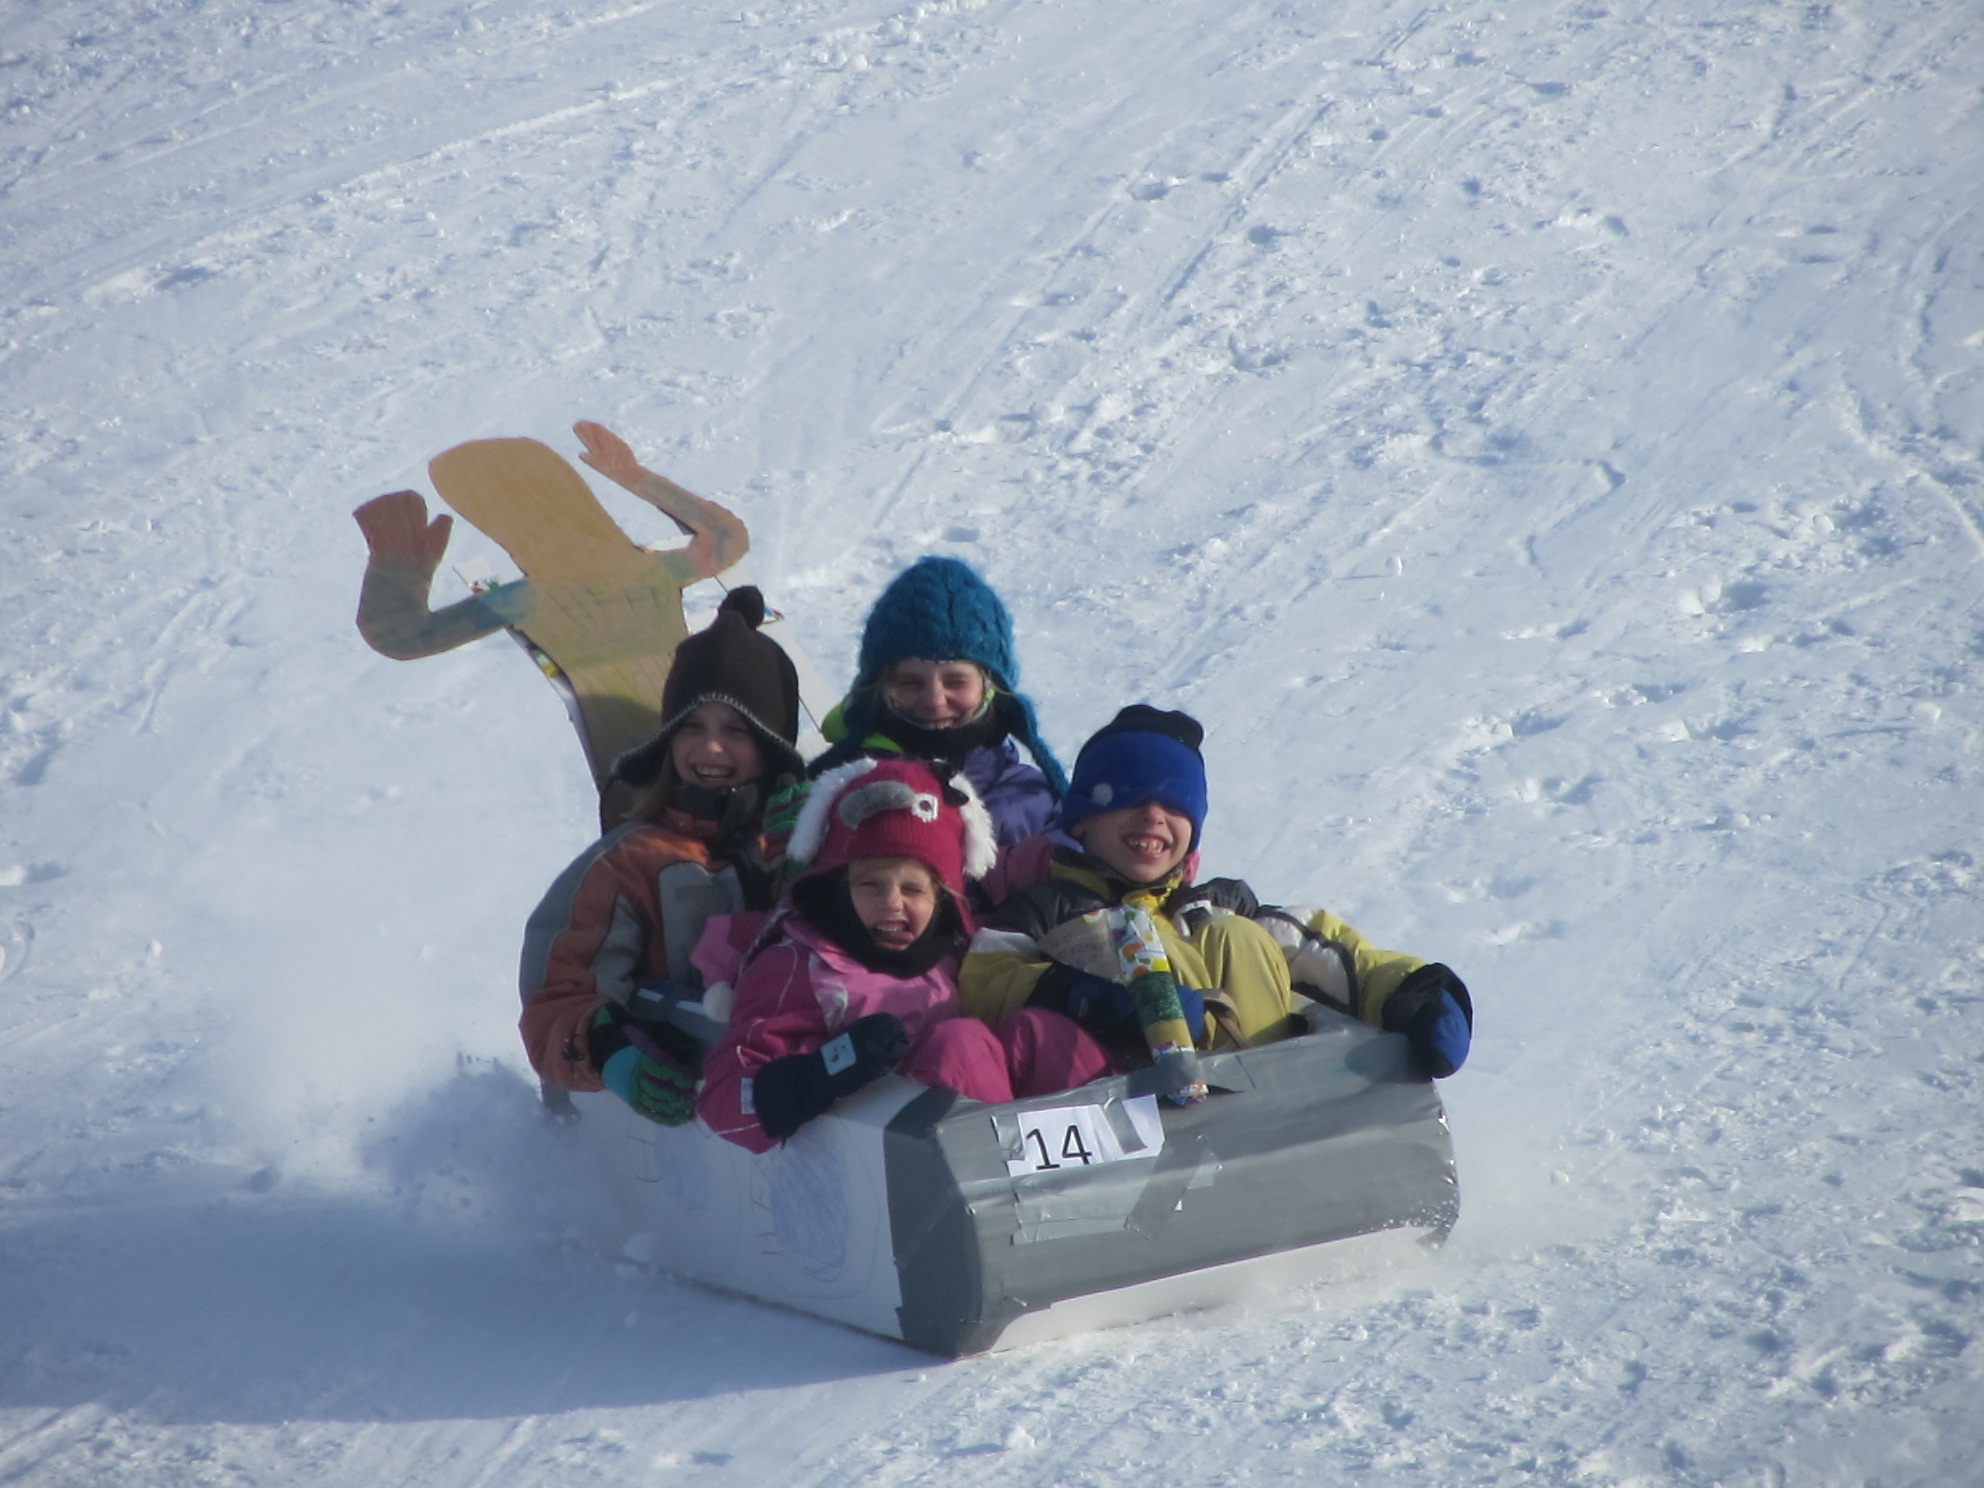 Old Winter Carnival bustles with family outdoor activity